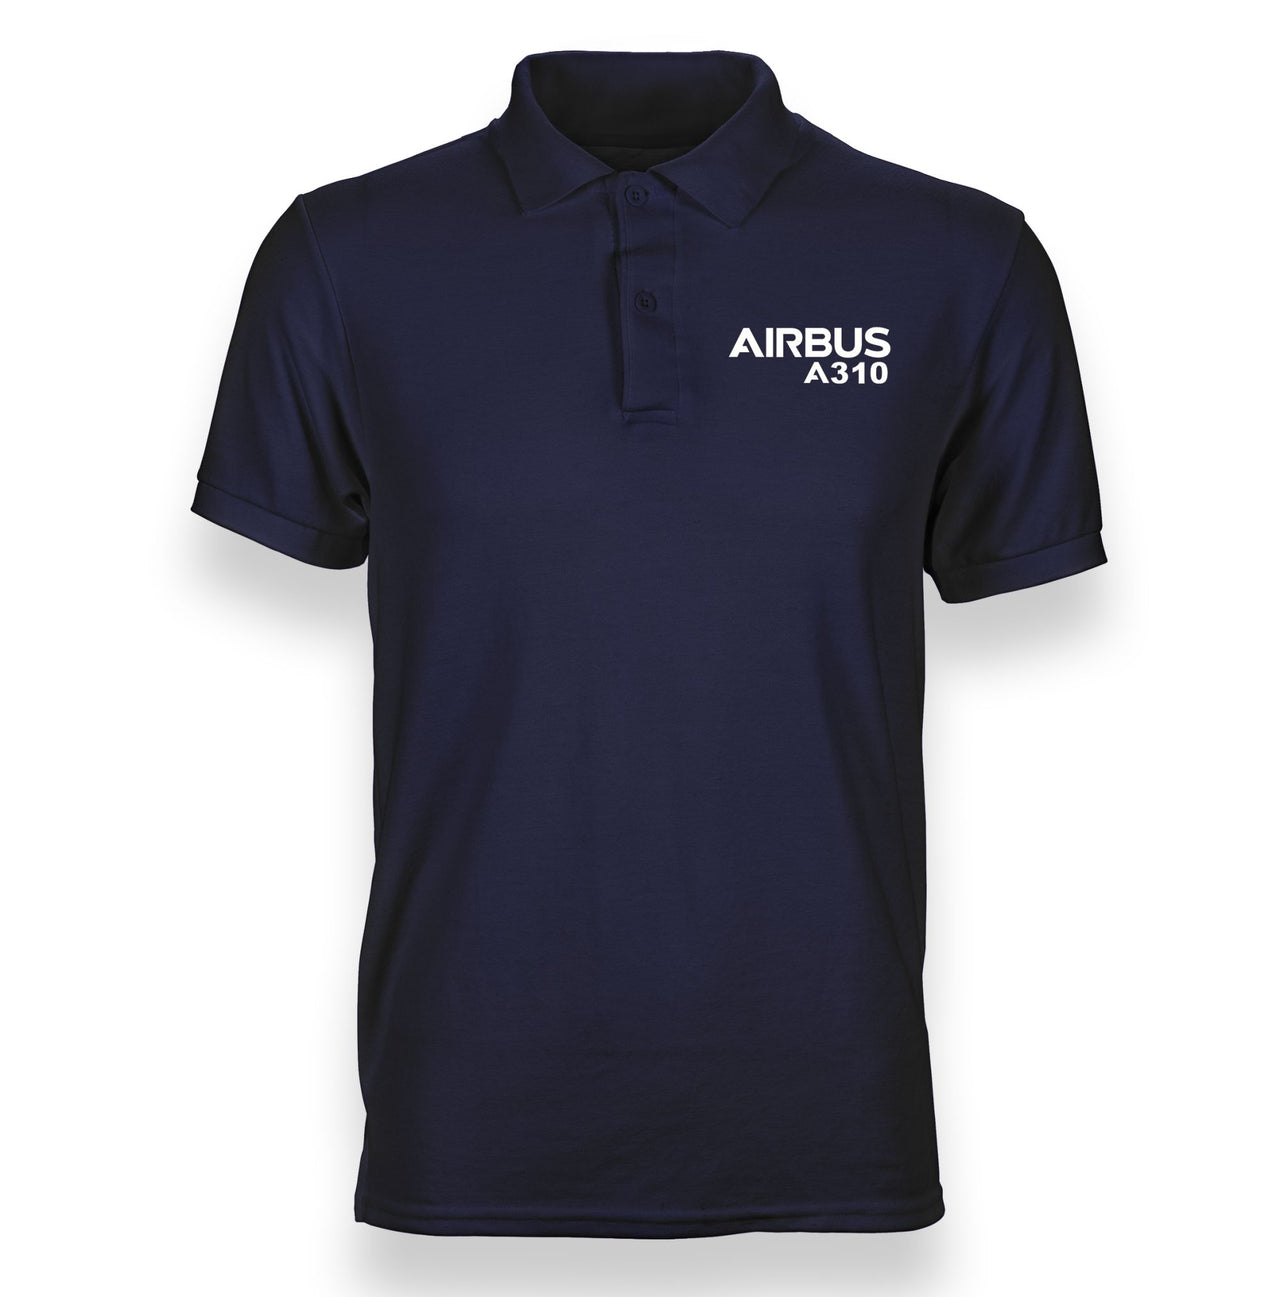 Airbus A310 & Text Designed "WOMEN" Polo T-Shirts